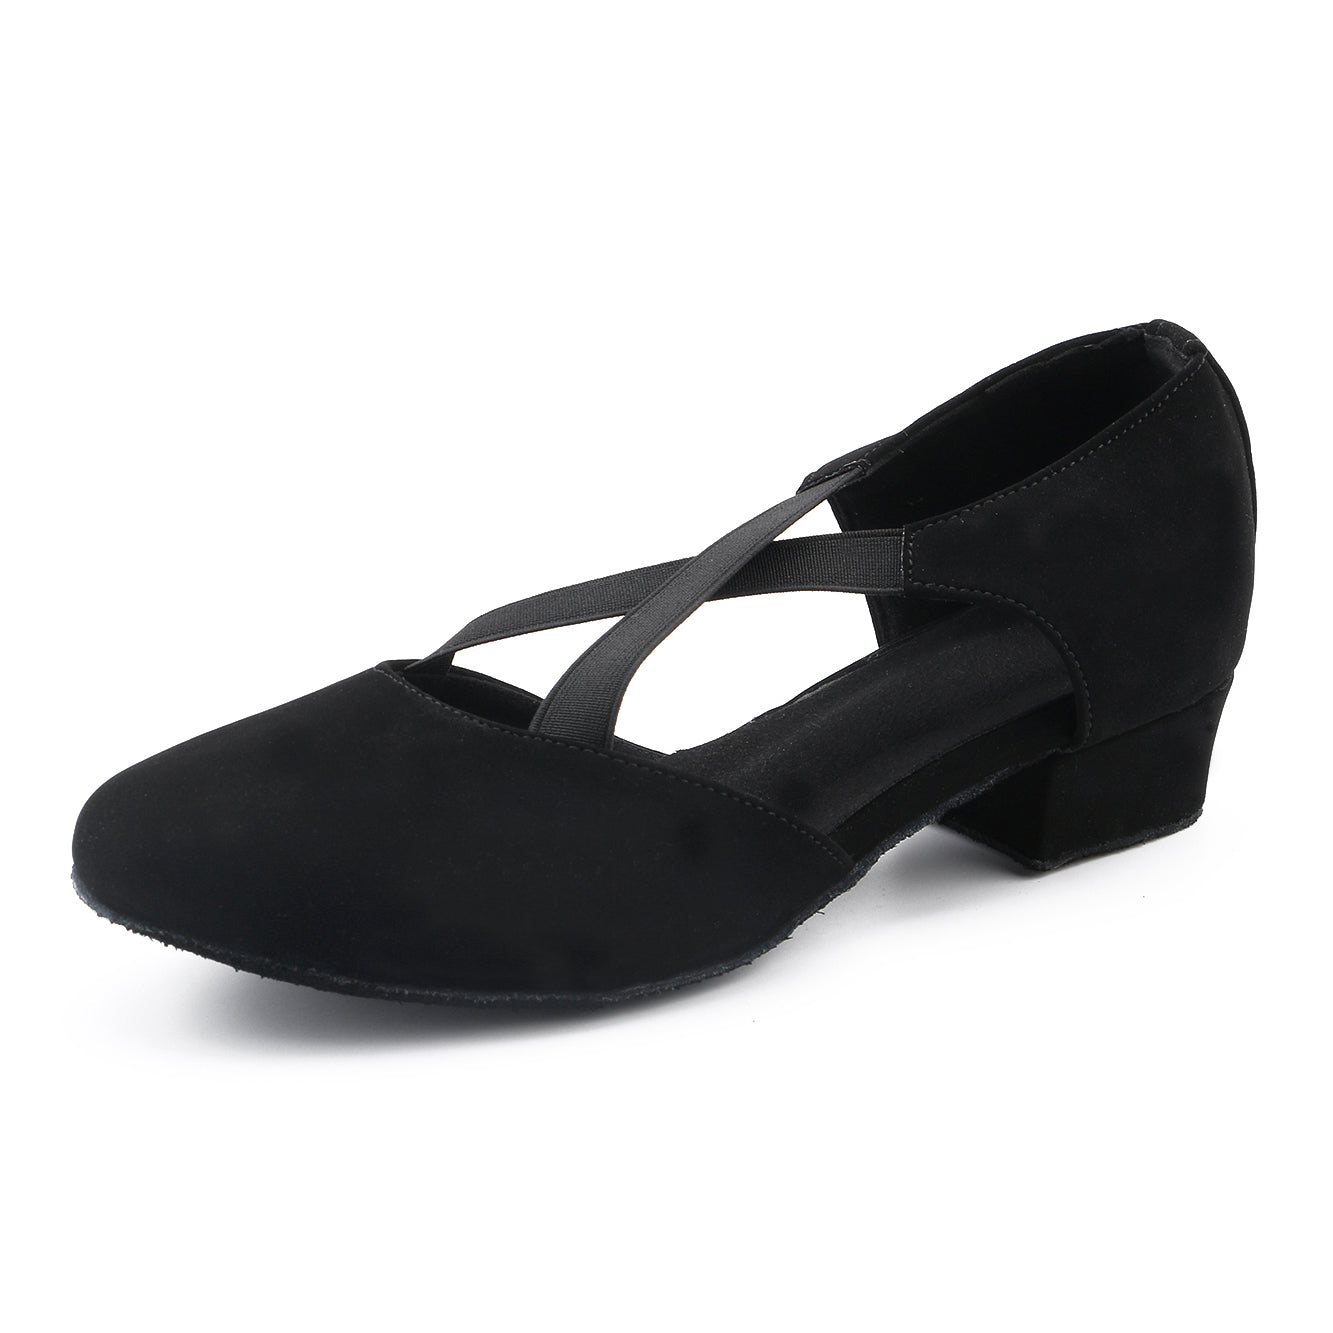 Ladies black low heel ballroom dancing shoes with suede sole for tango latin practice, closed-toe design (PD7307B)6